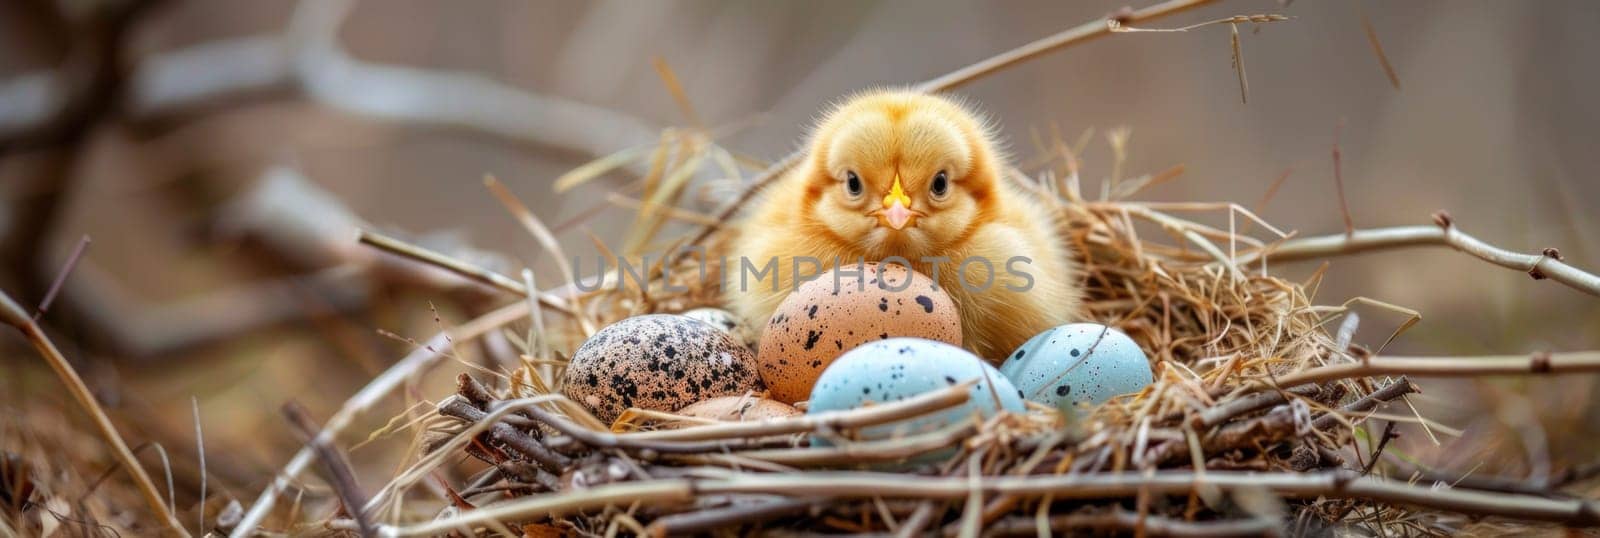 A small bird sitting in a nest with eggs on the ground